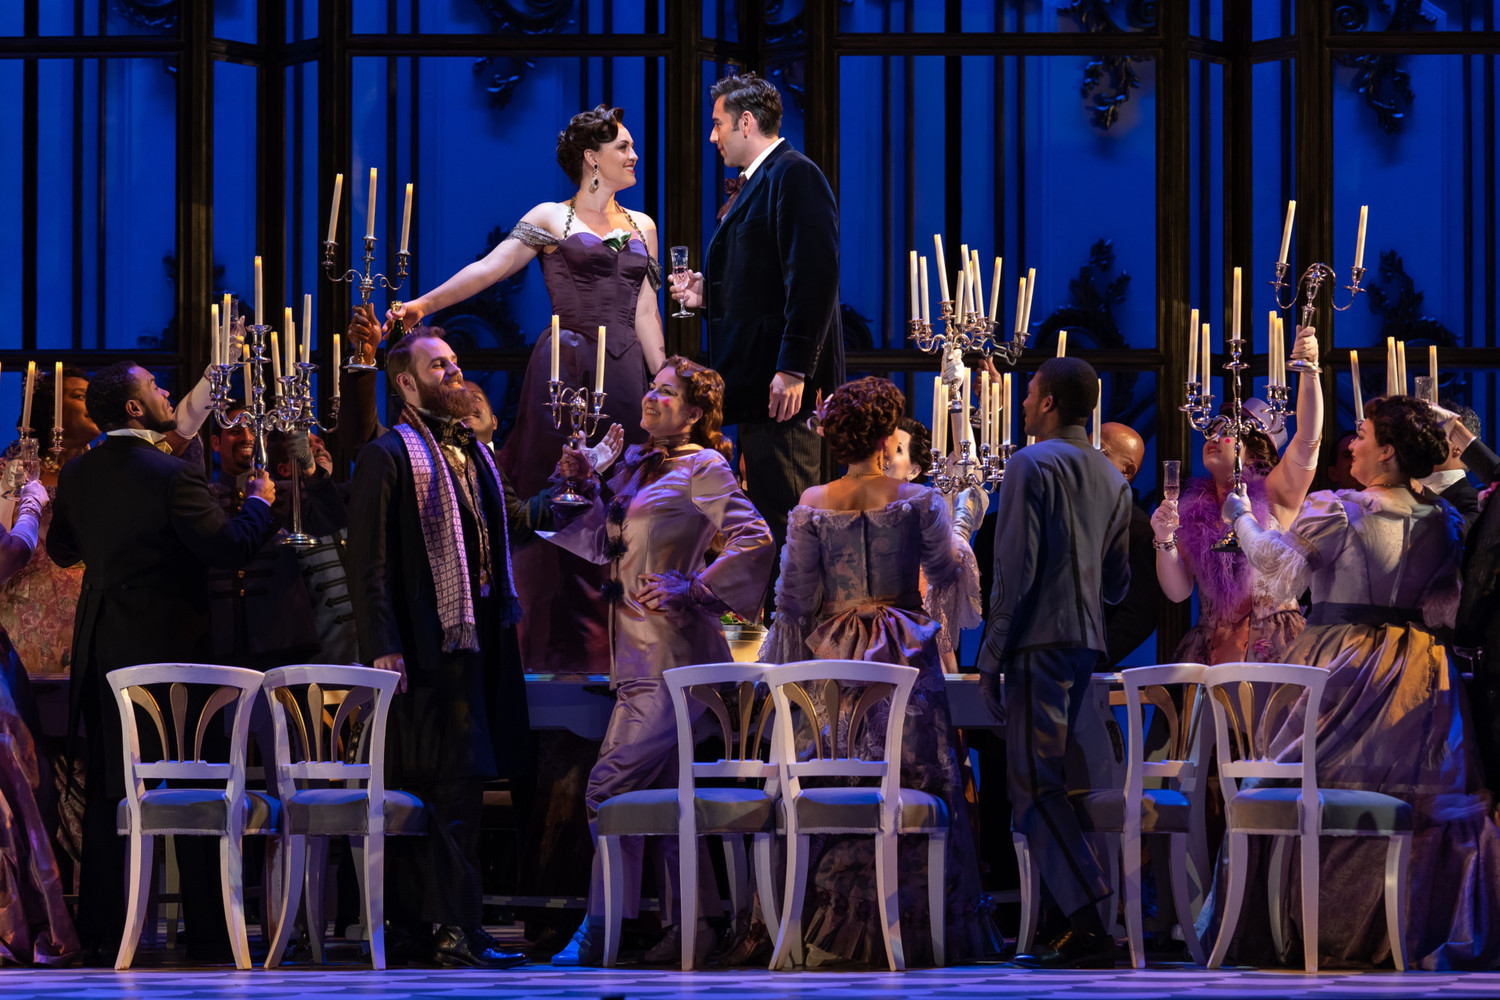 Review: The Washington National Opera's LA TRAVIATA is an Exquisite Revival 